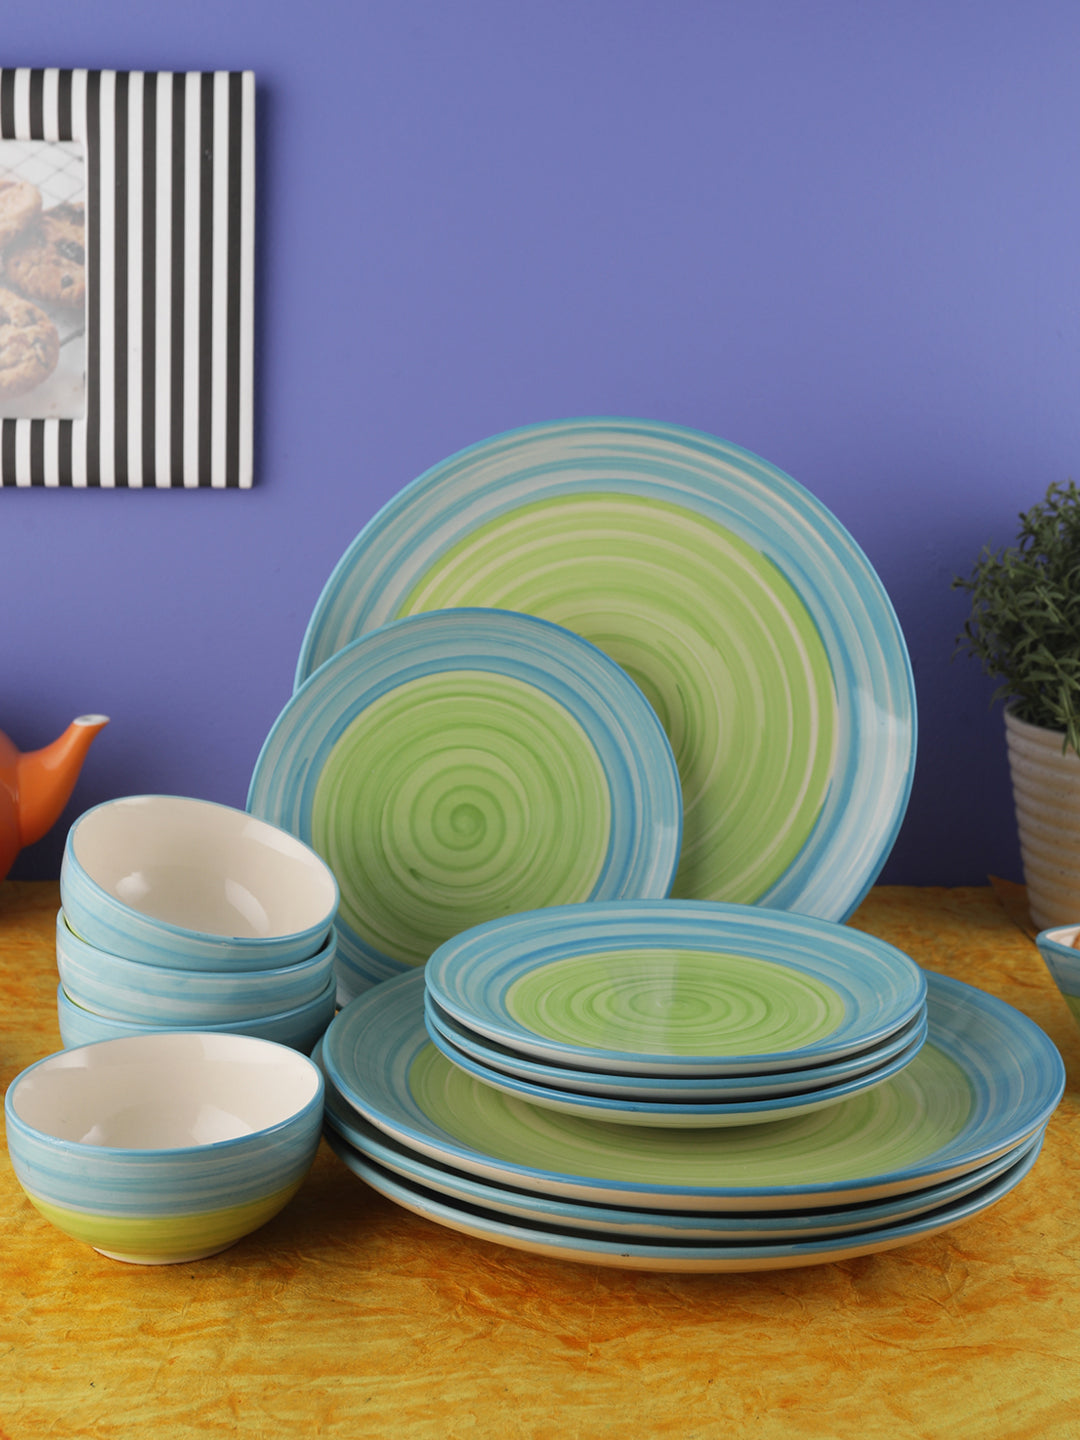 Hand Glazed Dinner Plates With Side/Quarter Plates & Katoris In Ceramic (12  Pieces, Microwave Safe)